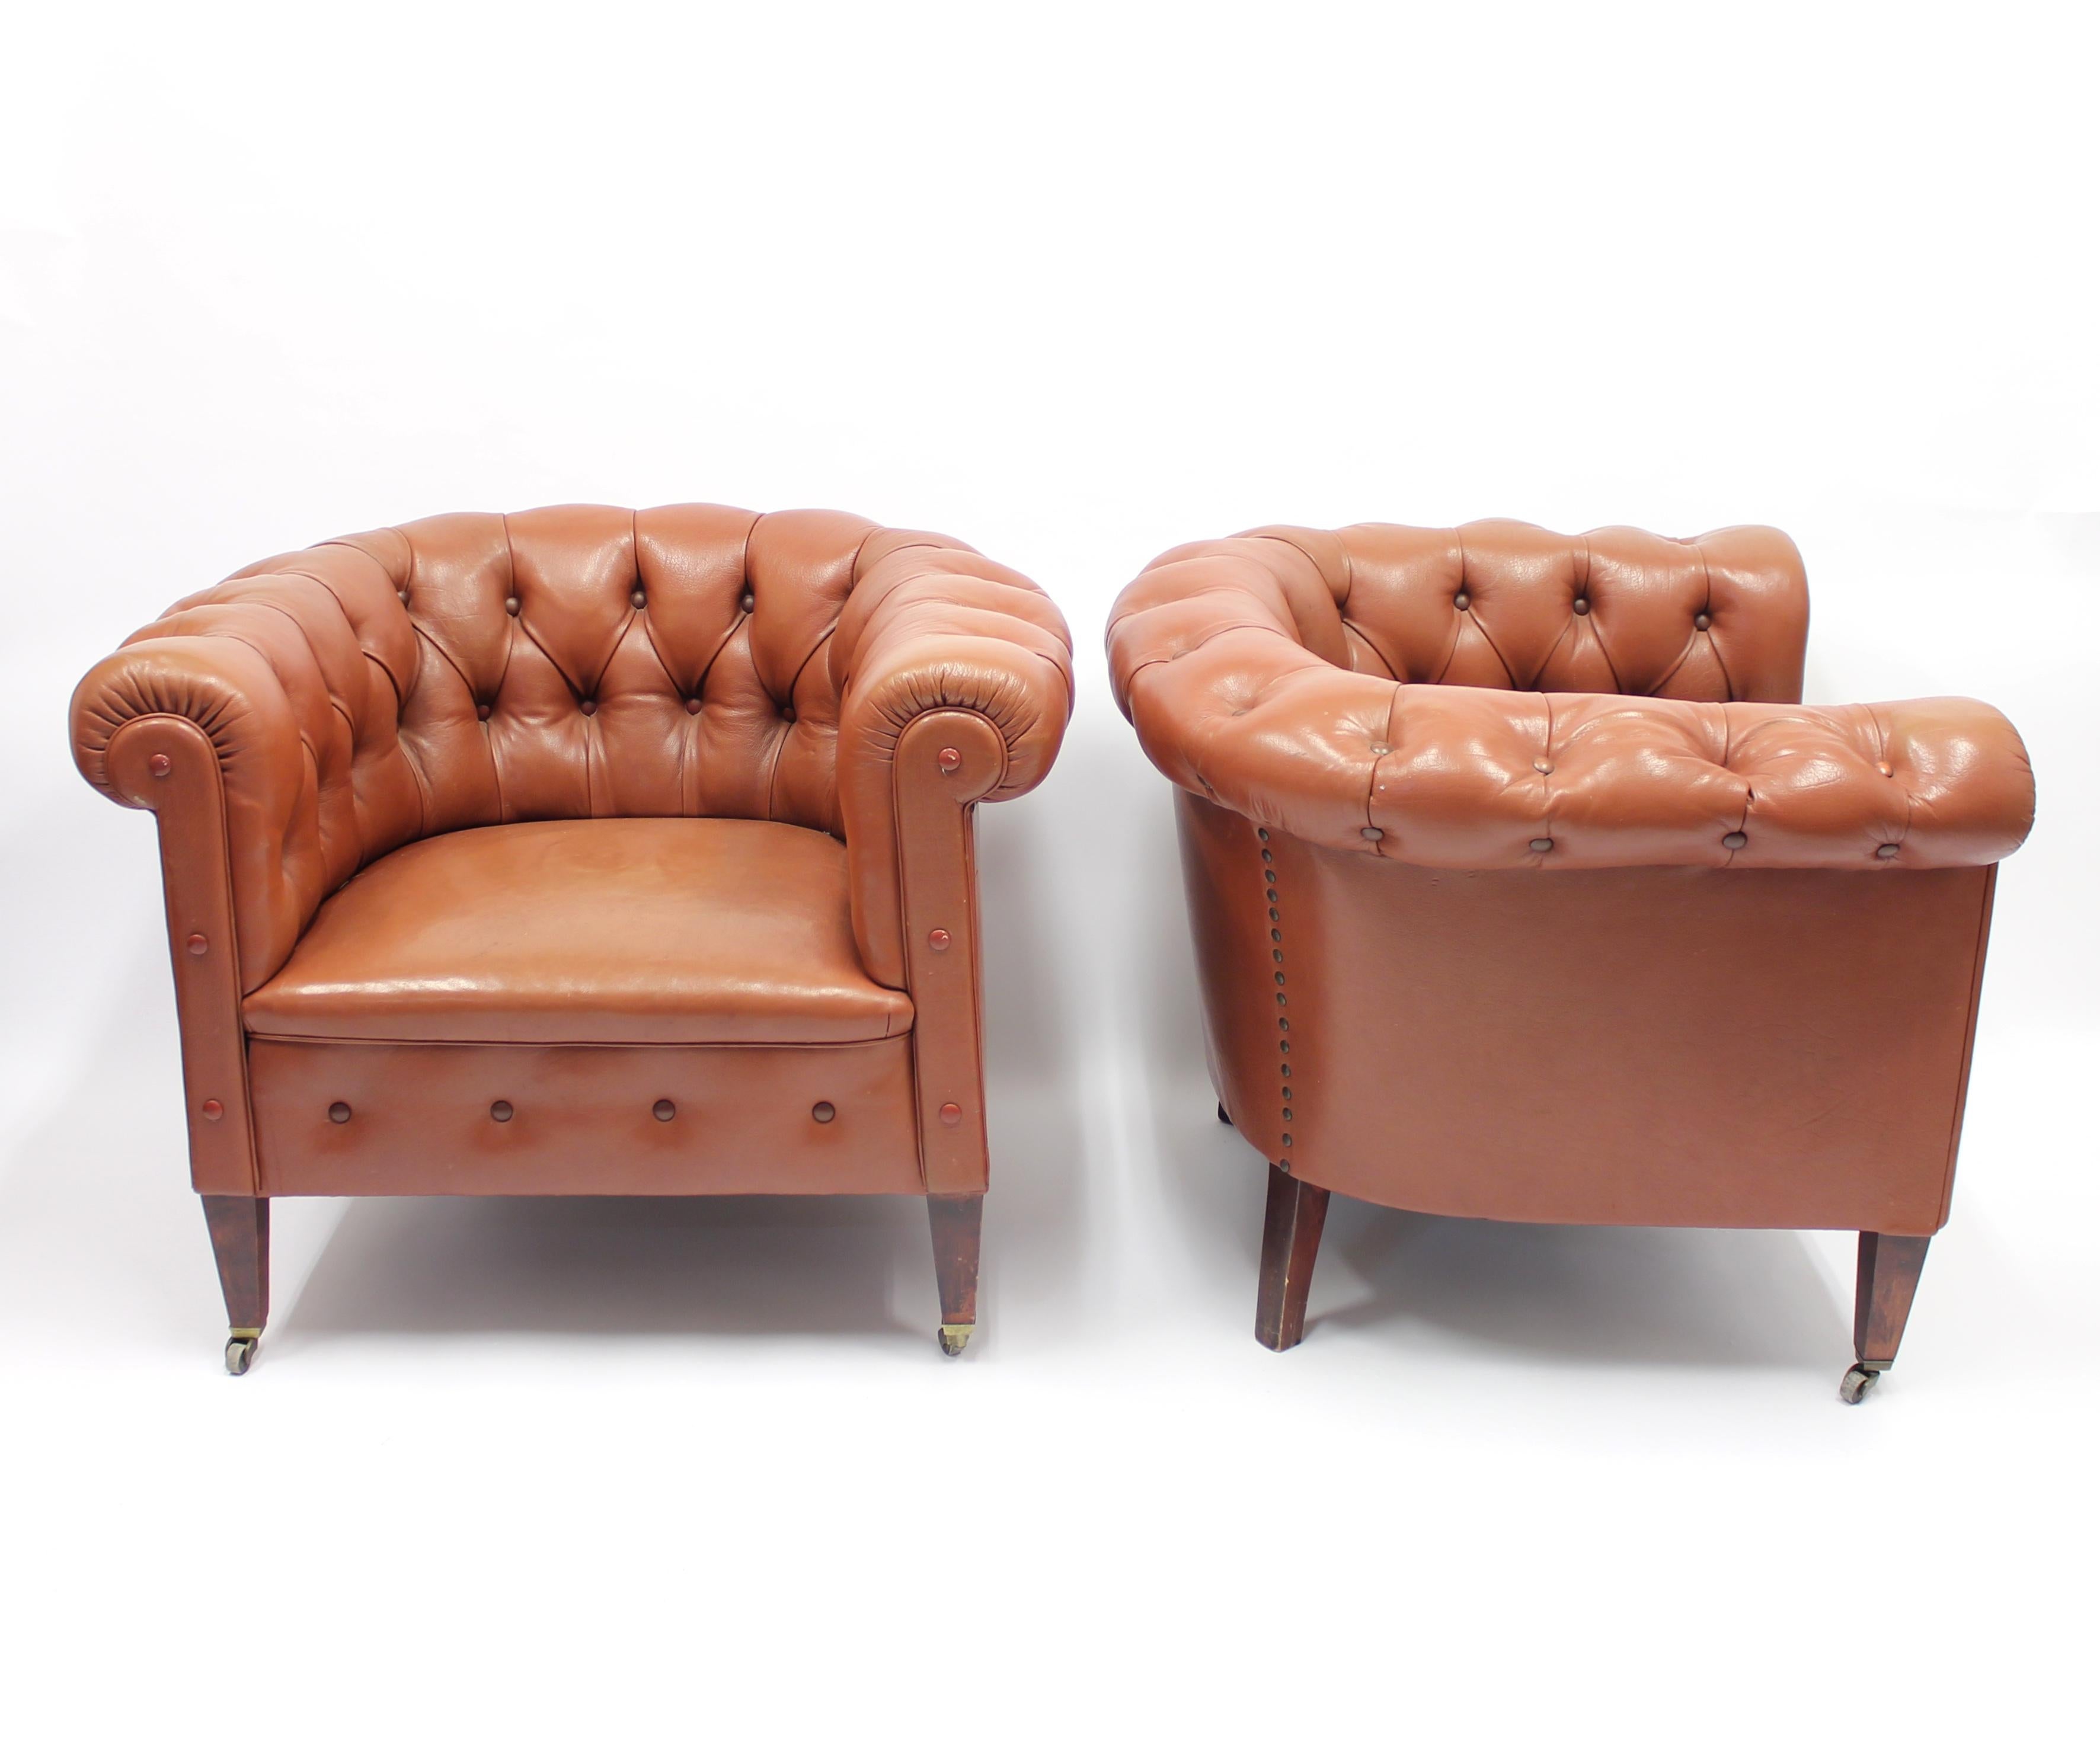 20th Century Pair of Chesterfield Club Chairs on Castors, 1940s